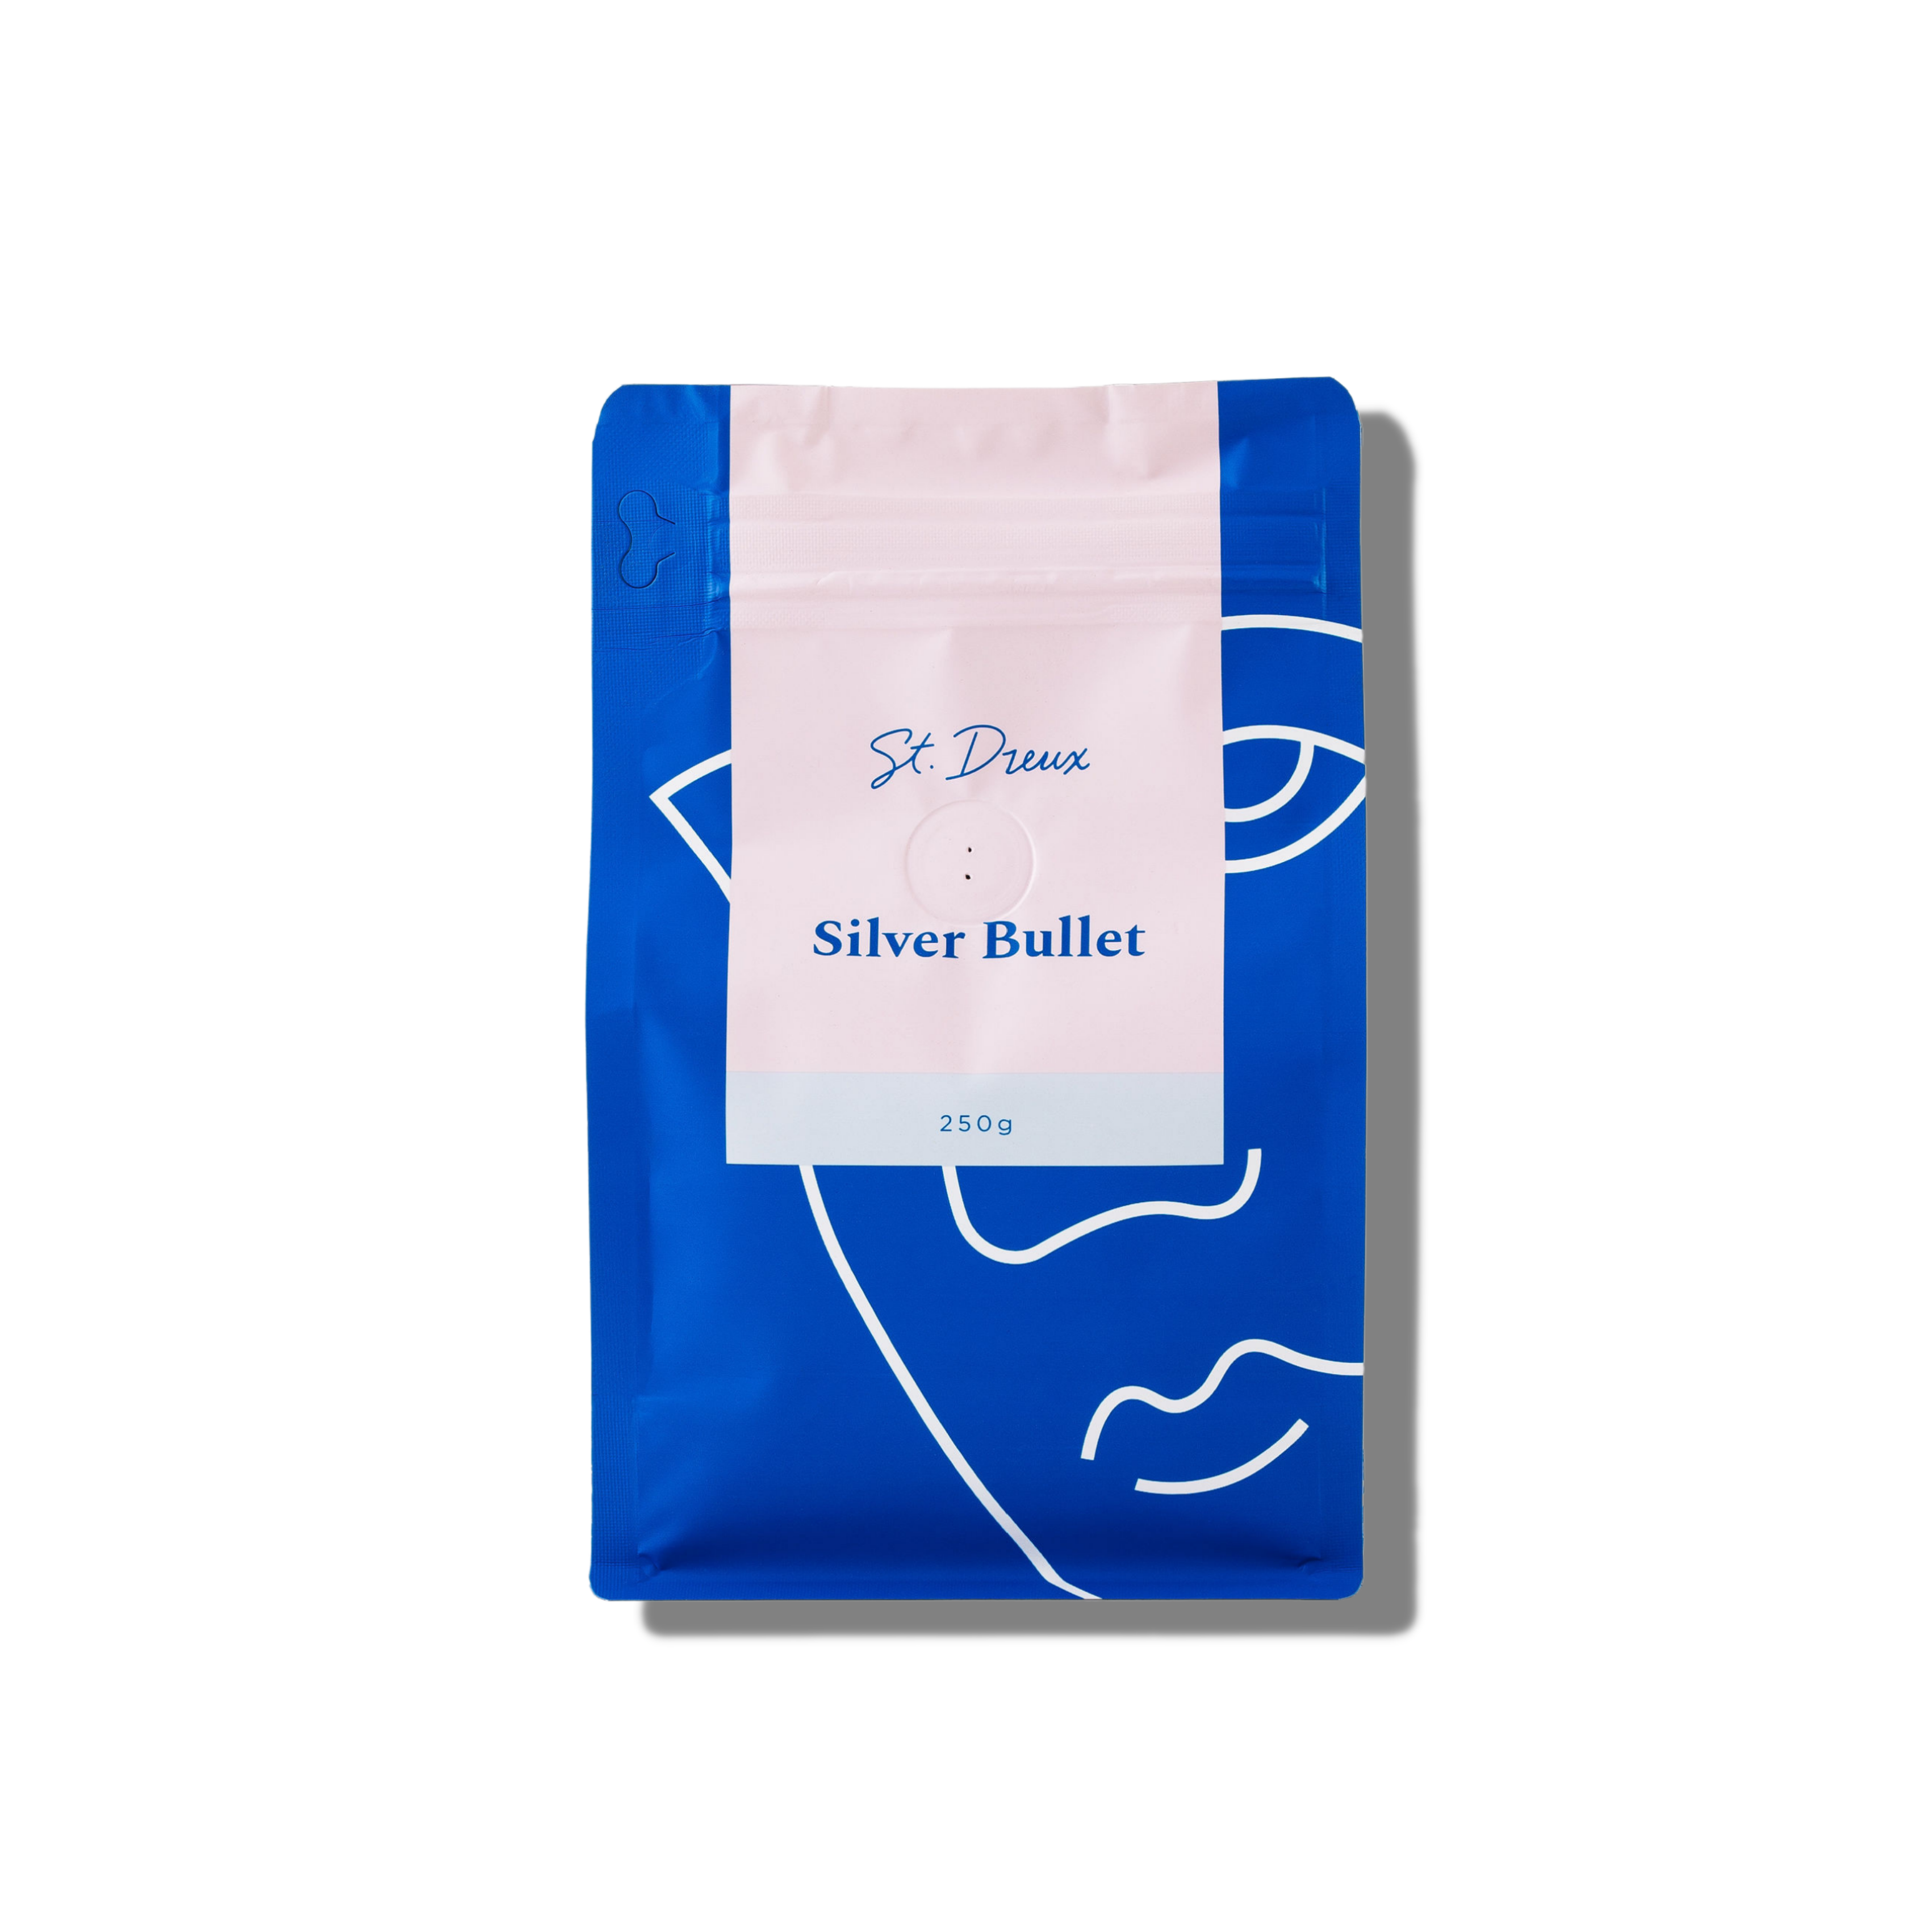 Silver-Bullet-250g-Coffee-St-Dreux